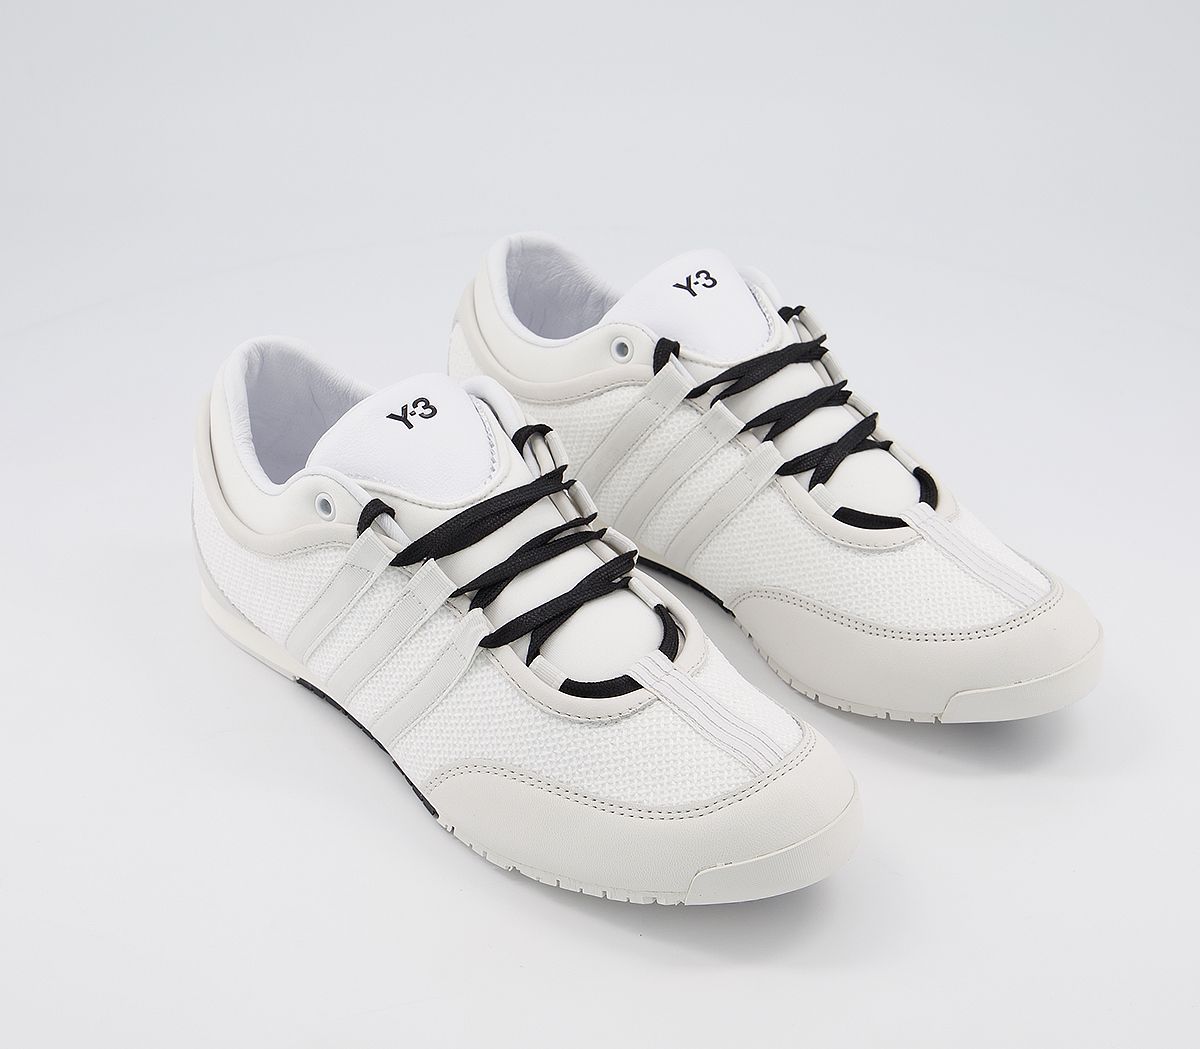 adidas Y3 Y-3 Boxing Trainers White Black - His trainers